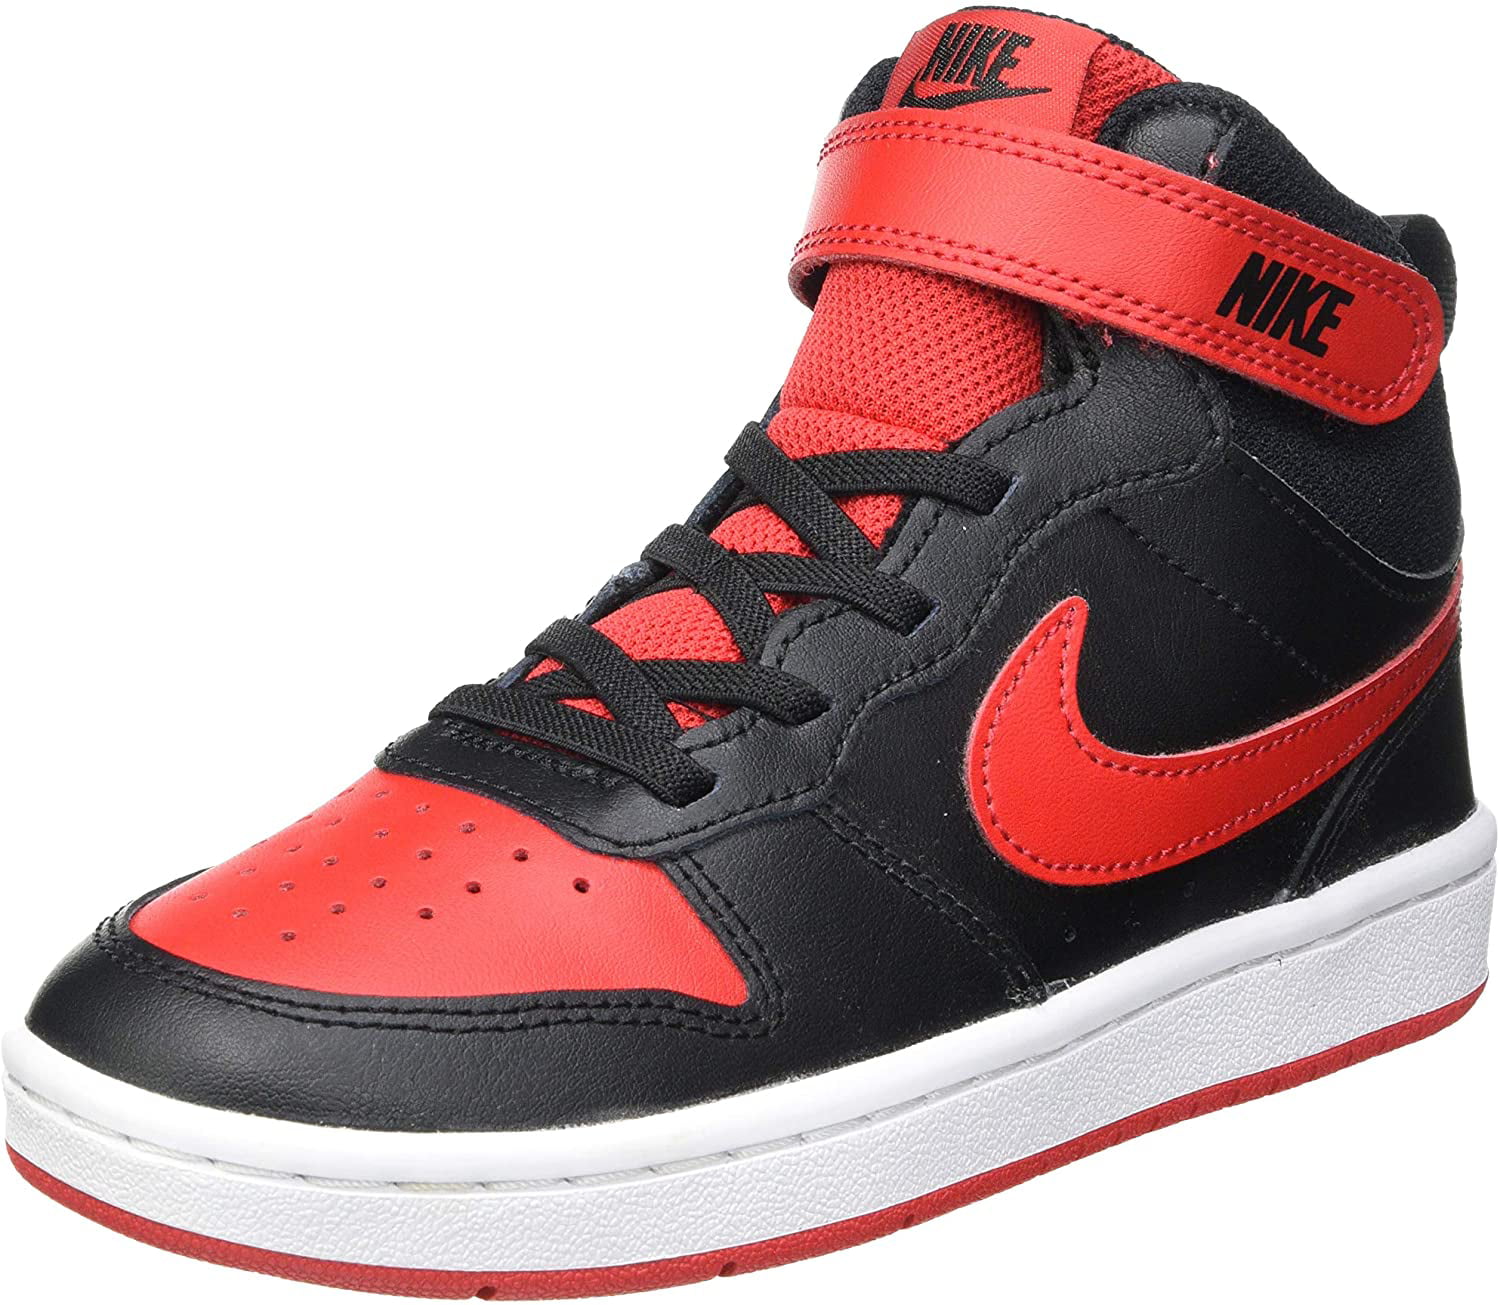 equilibrar Extracción Buscar a tientas Nike Court Borough Mid 2 Gs Trainers Child Black/Red High Top Trainers  Shoes - Walmart.com